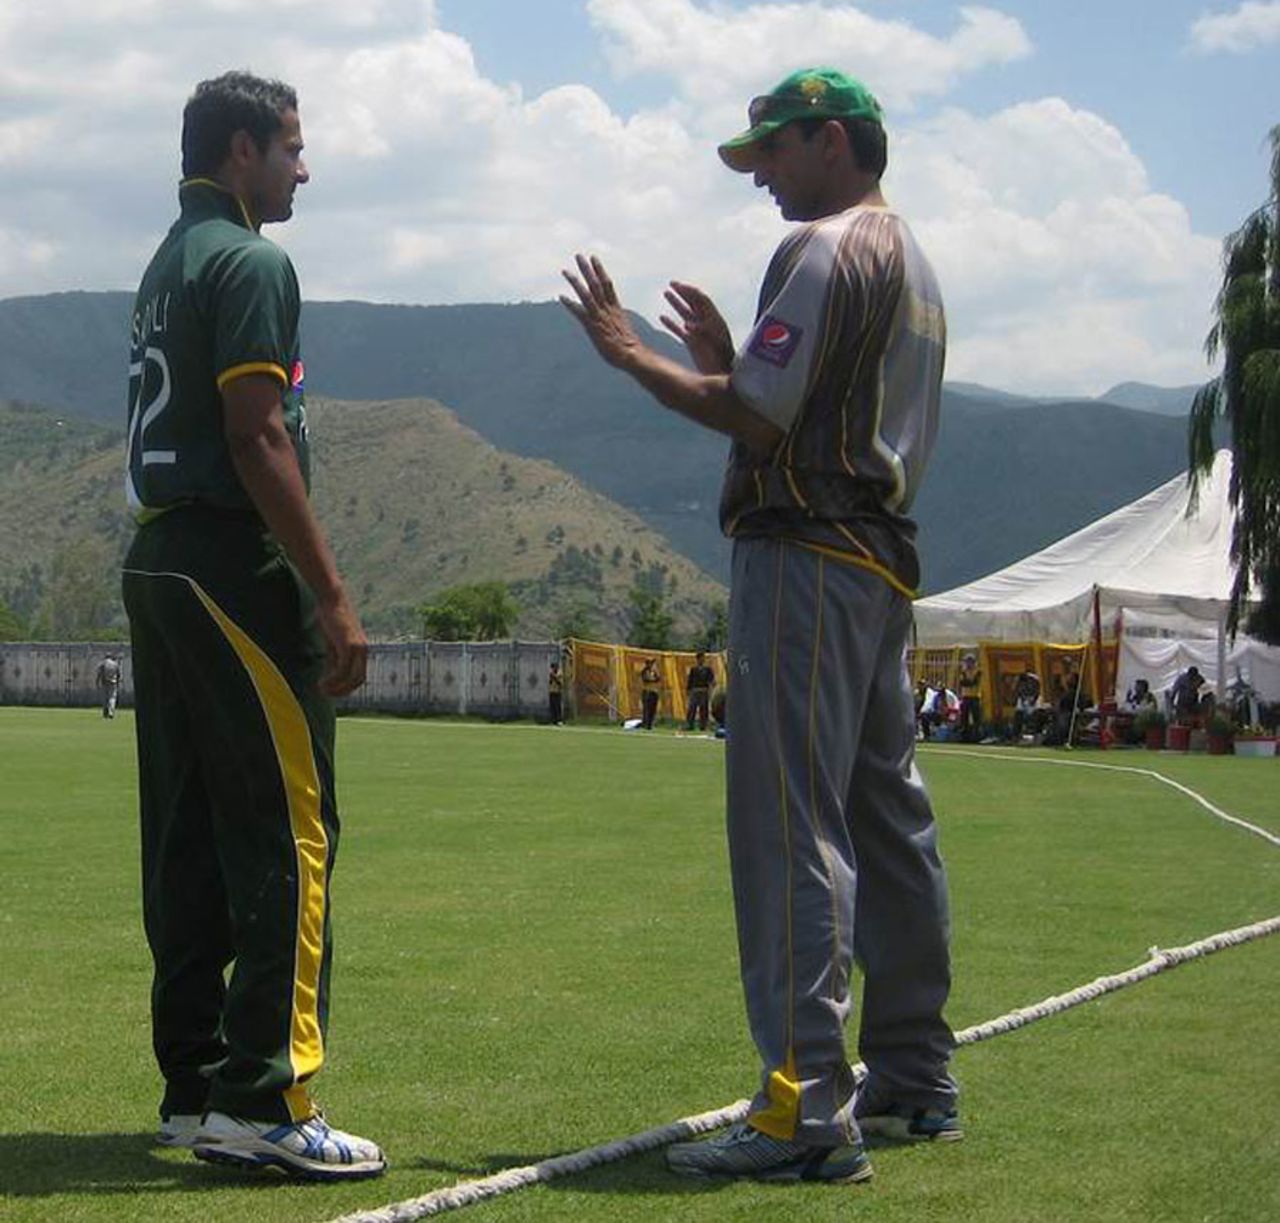 Mohammad Akram instructs one of his wards amid a magnificent backdrop, Karachi, April 26, 2013